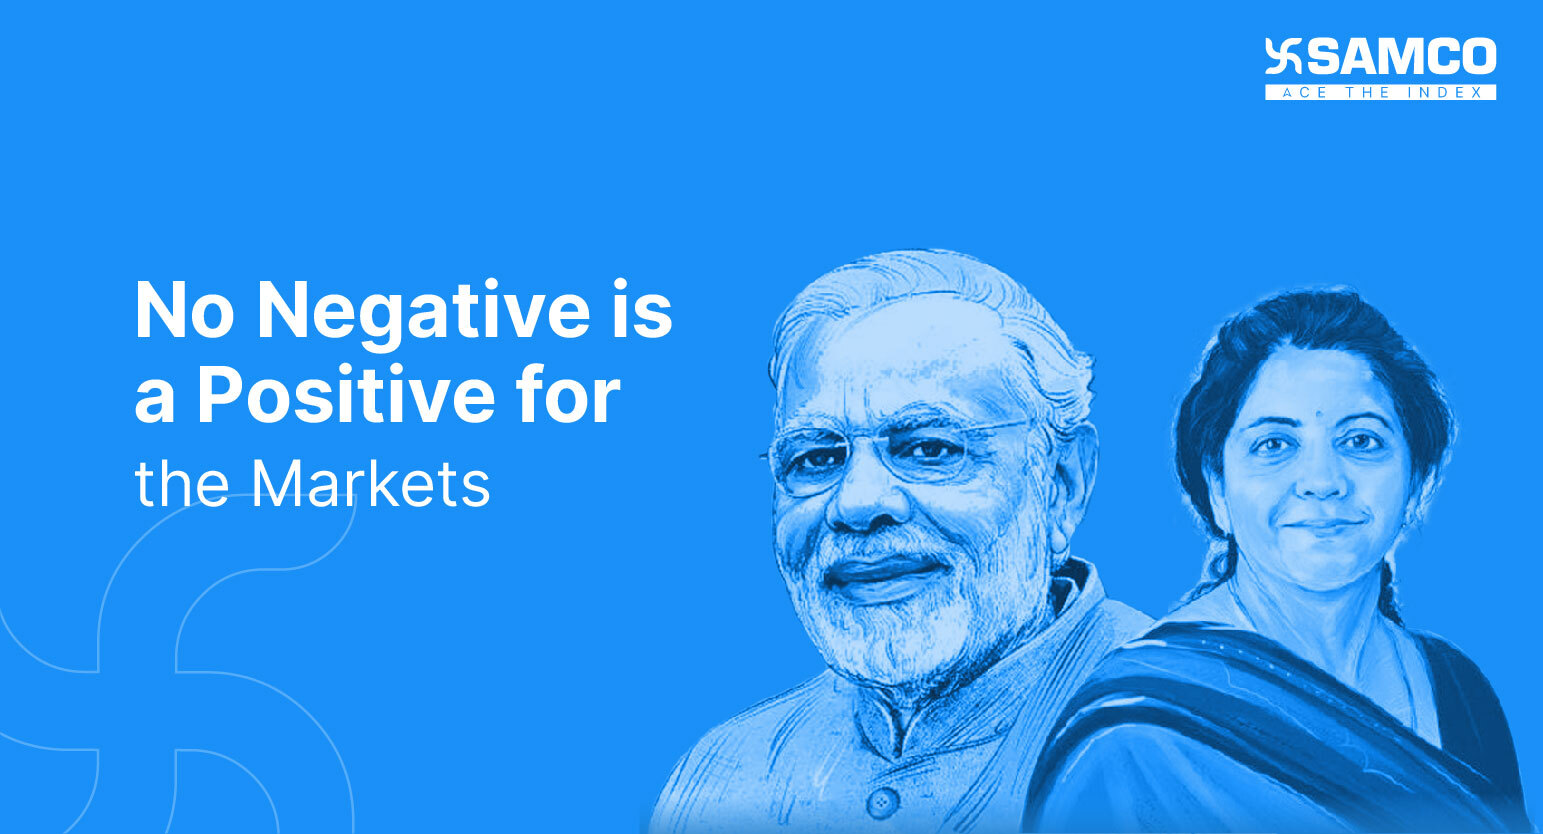 No Negative is a Positive for the Markets